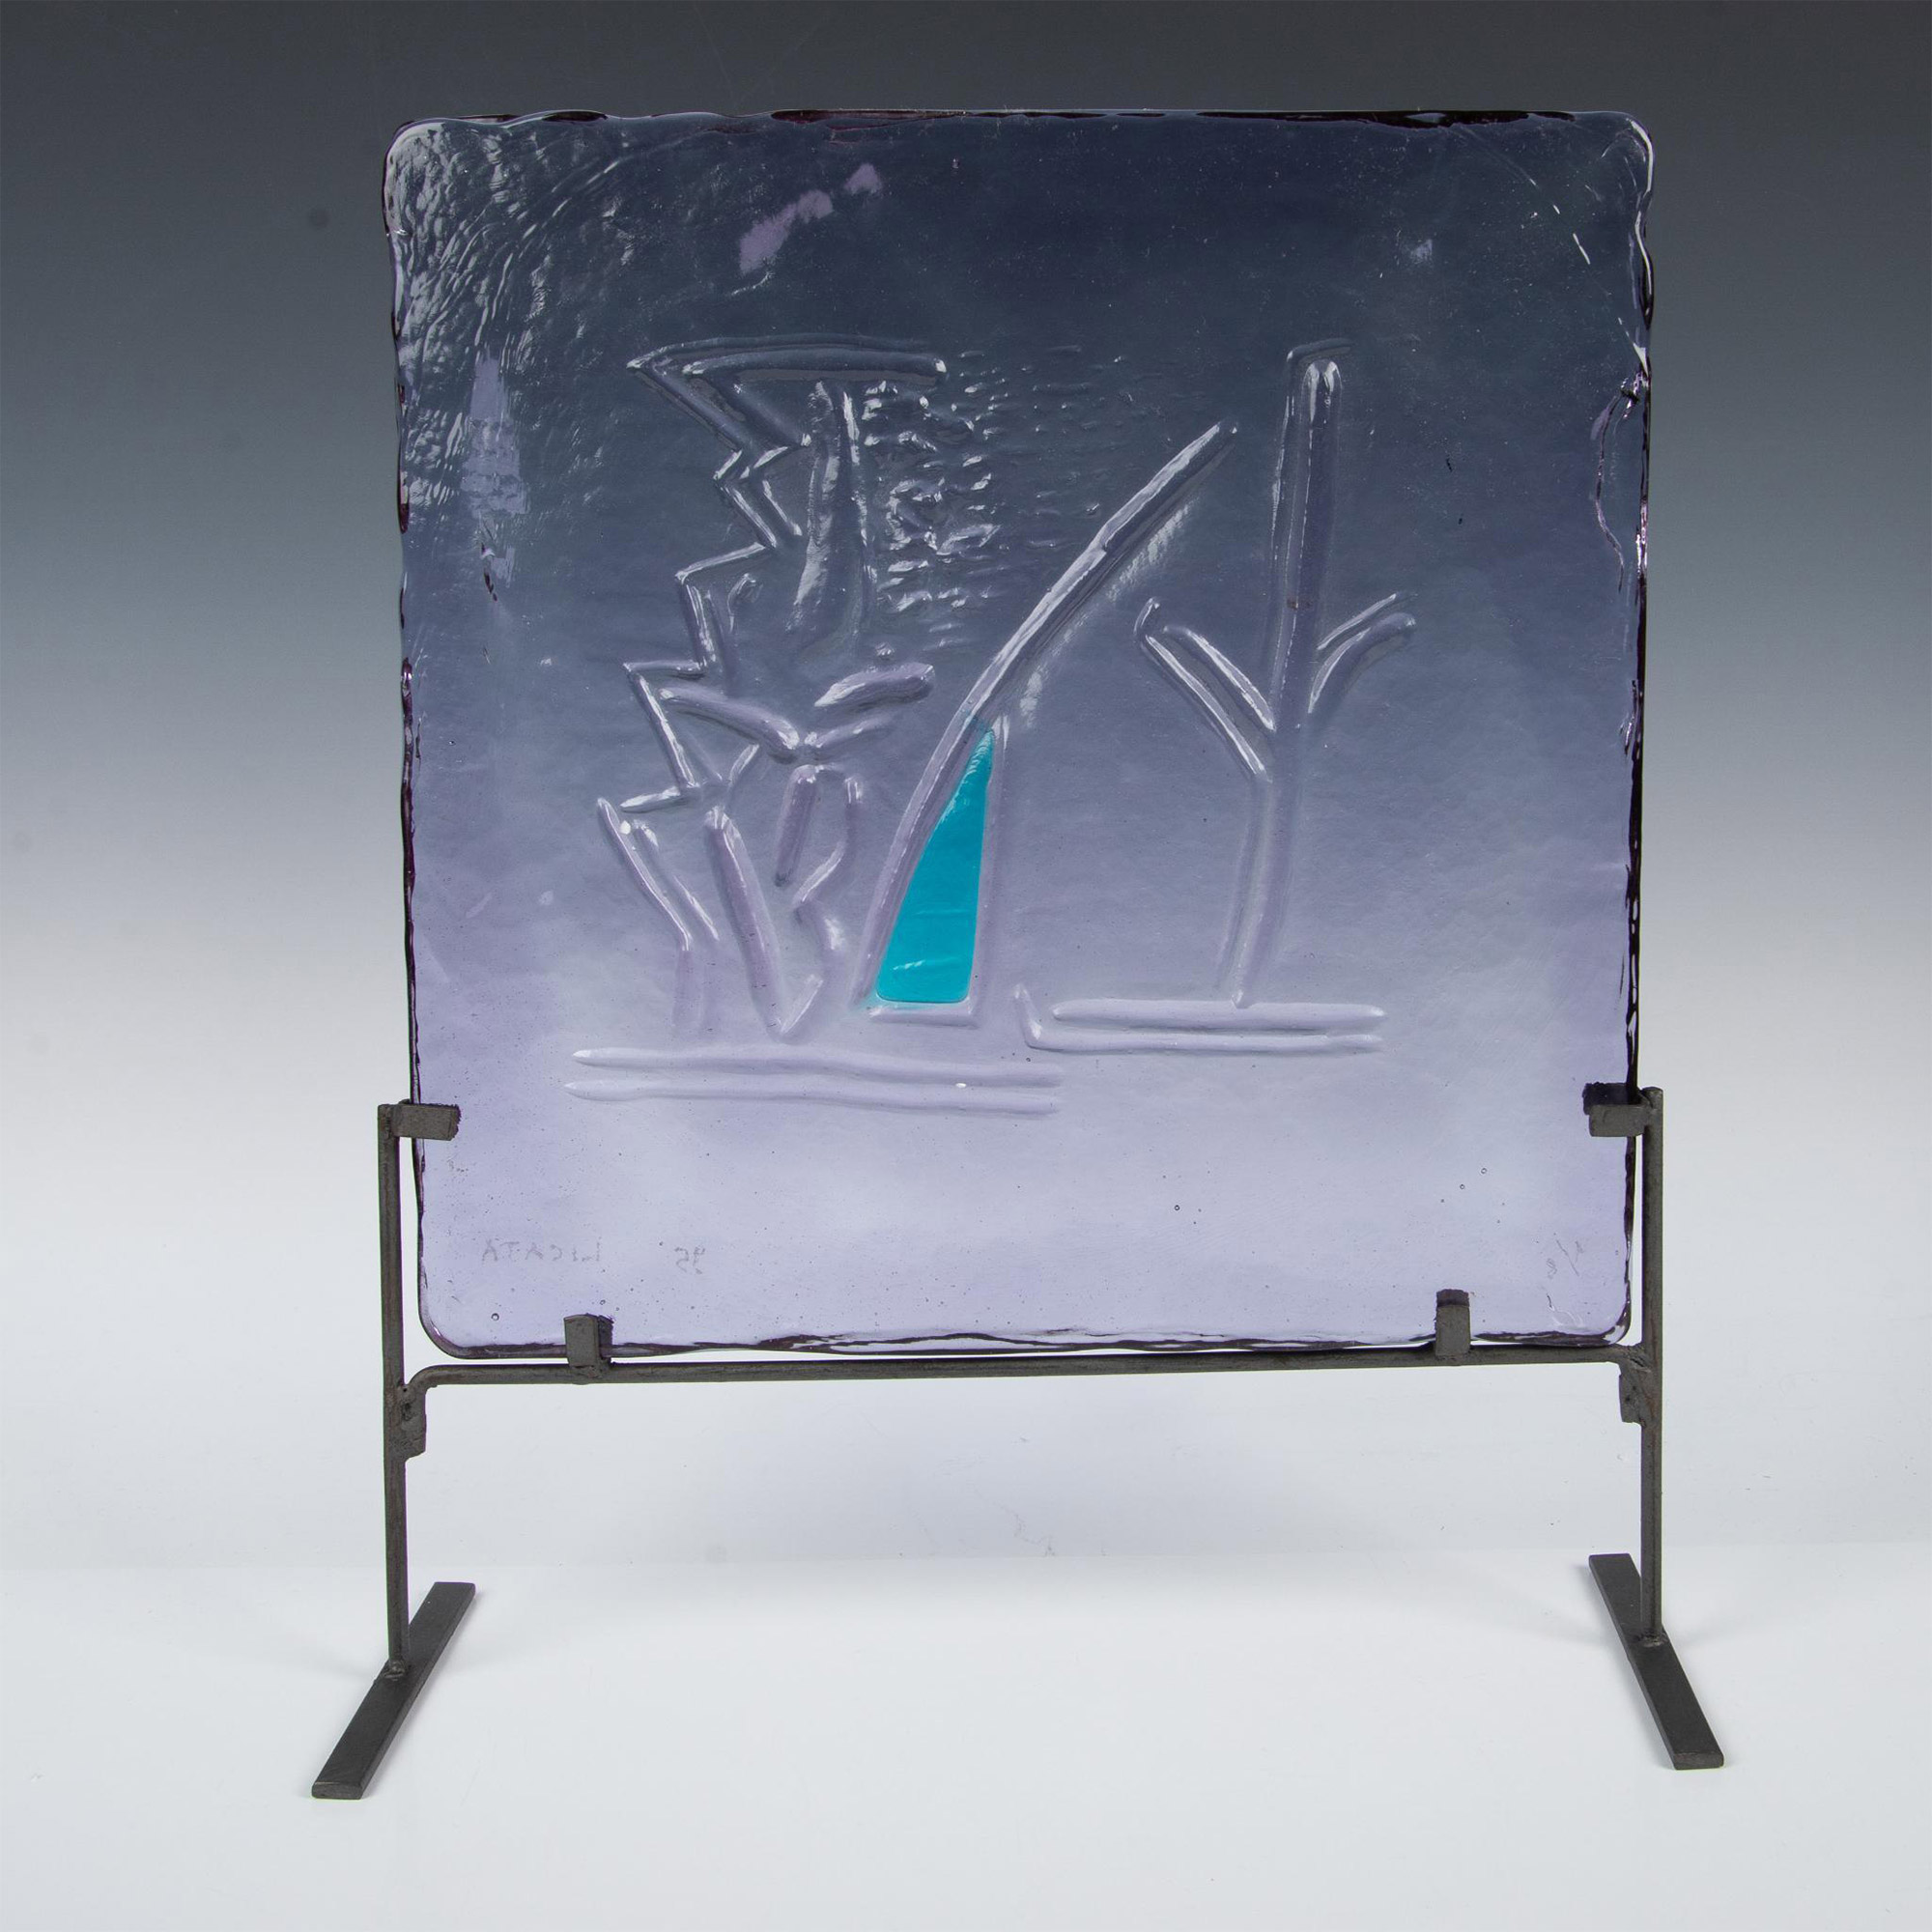 Murano Riccardo Licata Glass Tile Sculpture with Stand - Image 6 of 8